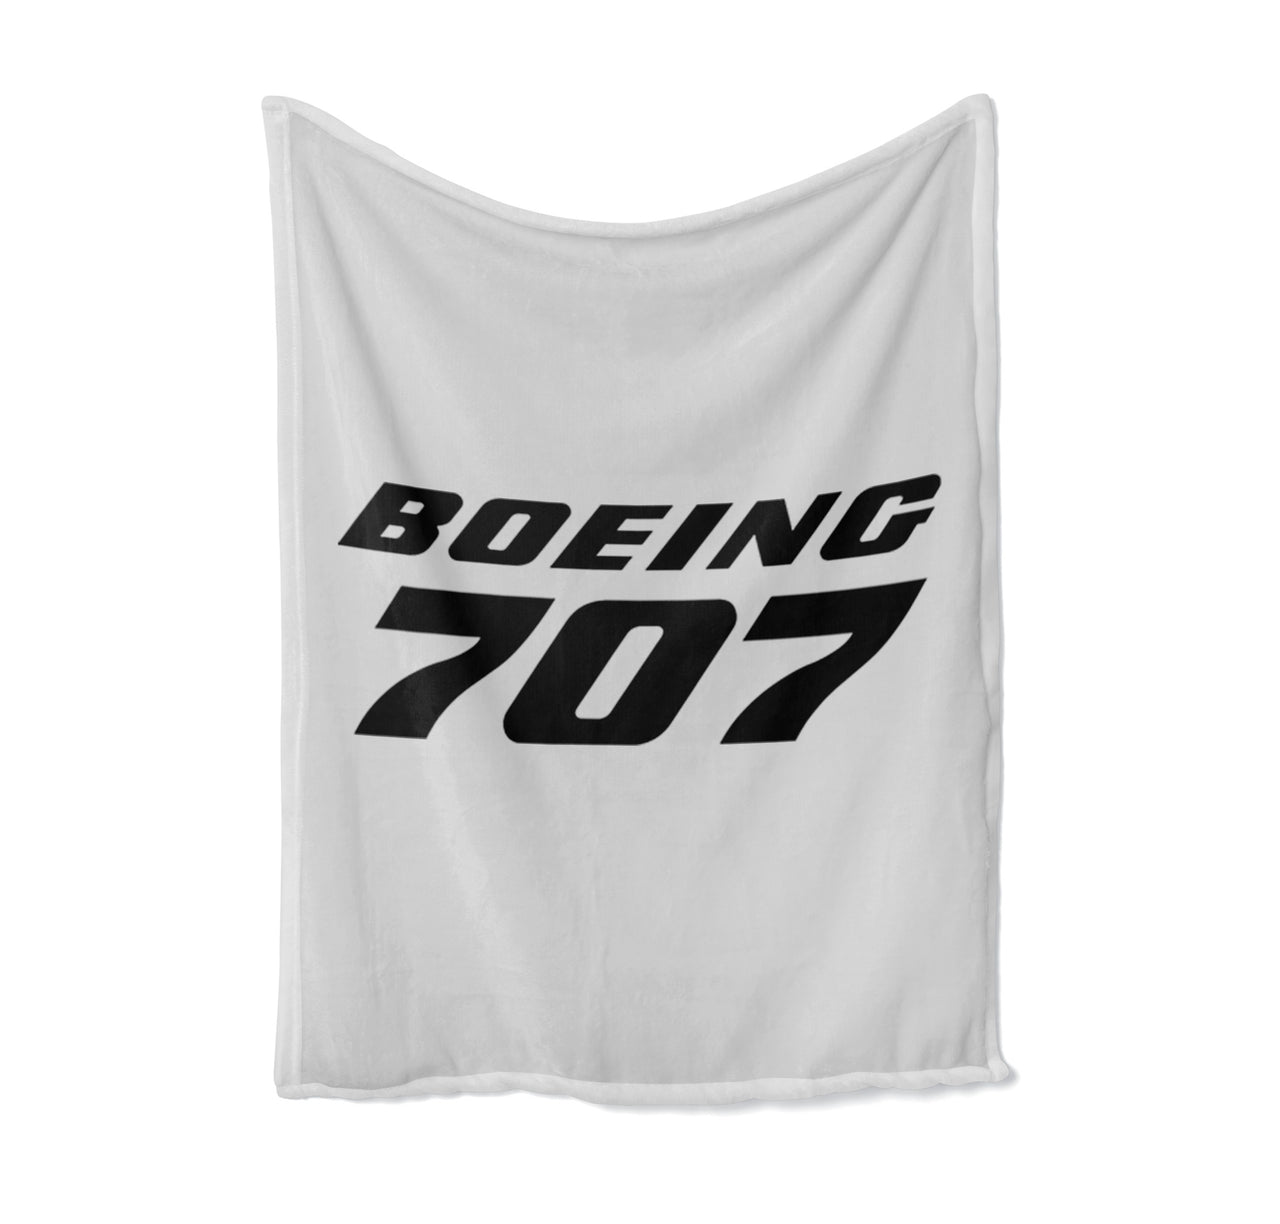 Boeing 707 & Text Designed Bed Blankets & Covers